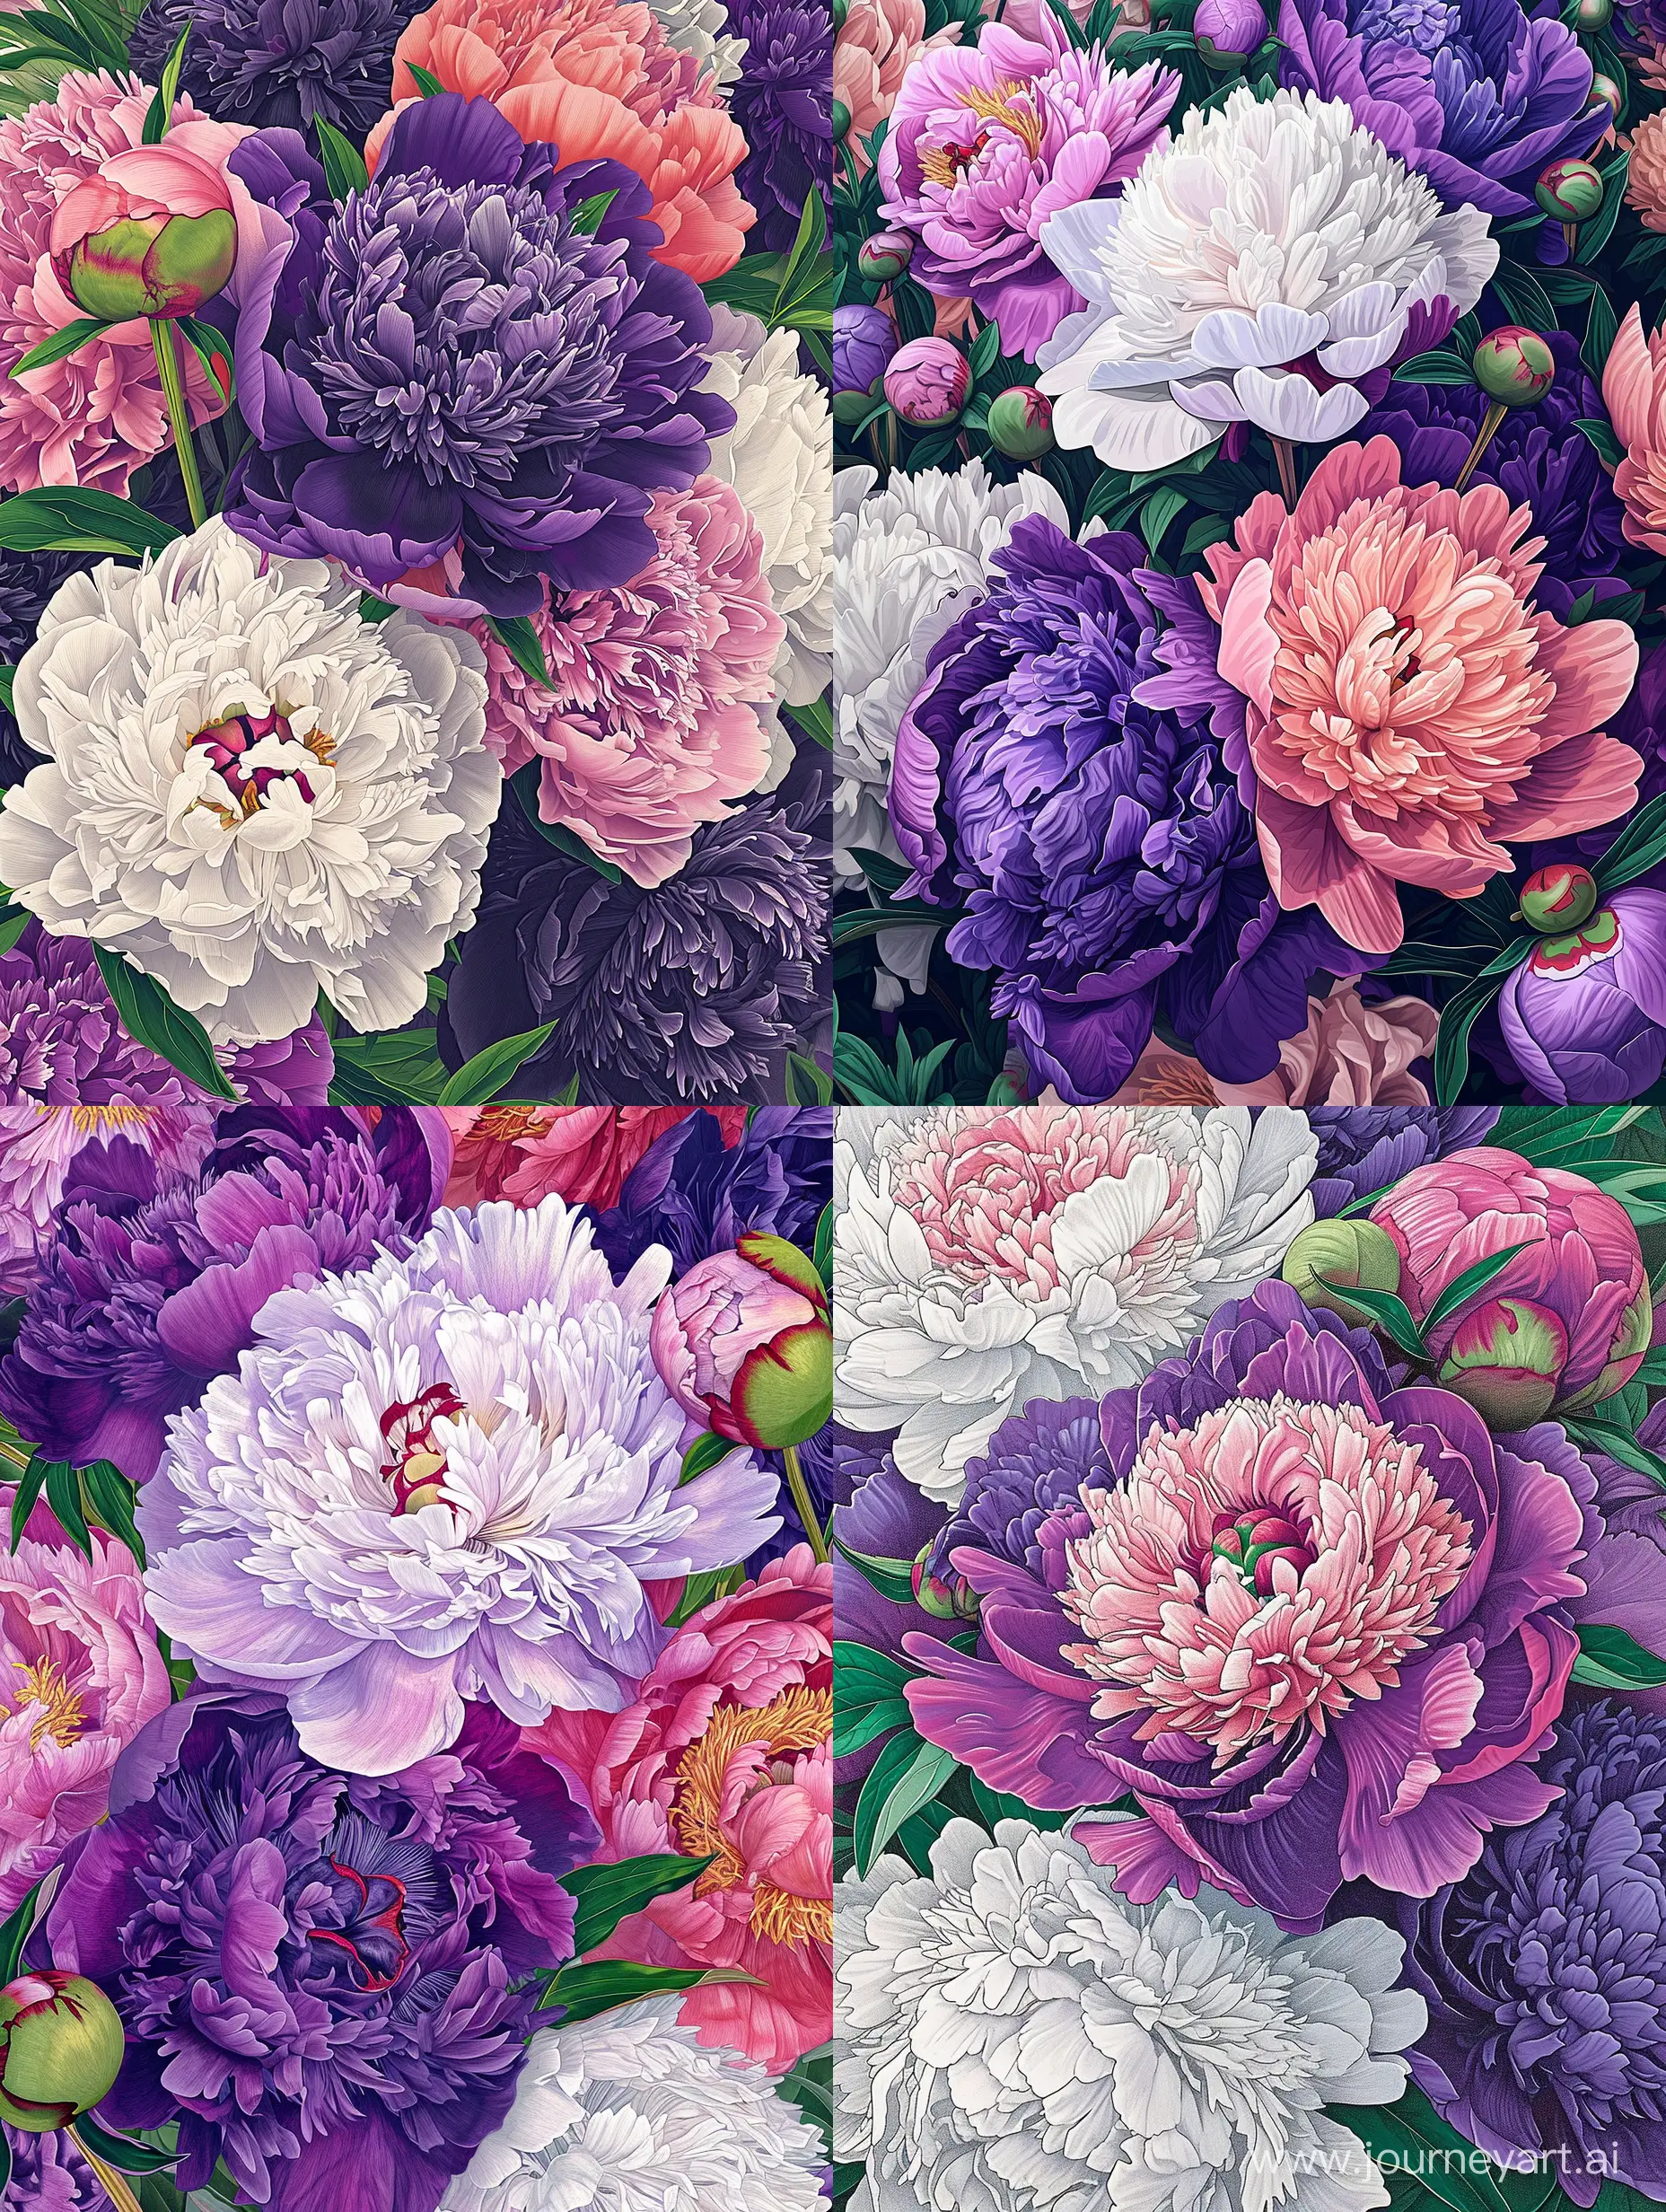 Exquisite-HyperRealistic-Risograph-Art-Blooming-Peonies-in-William-Morris-Style